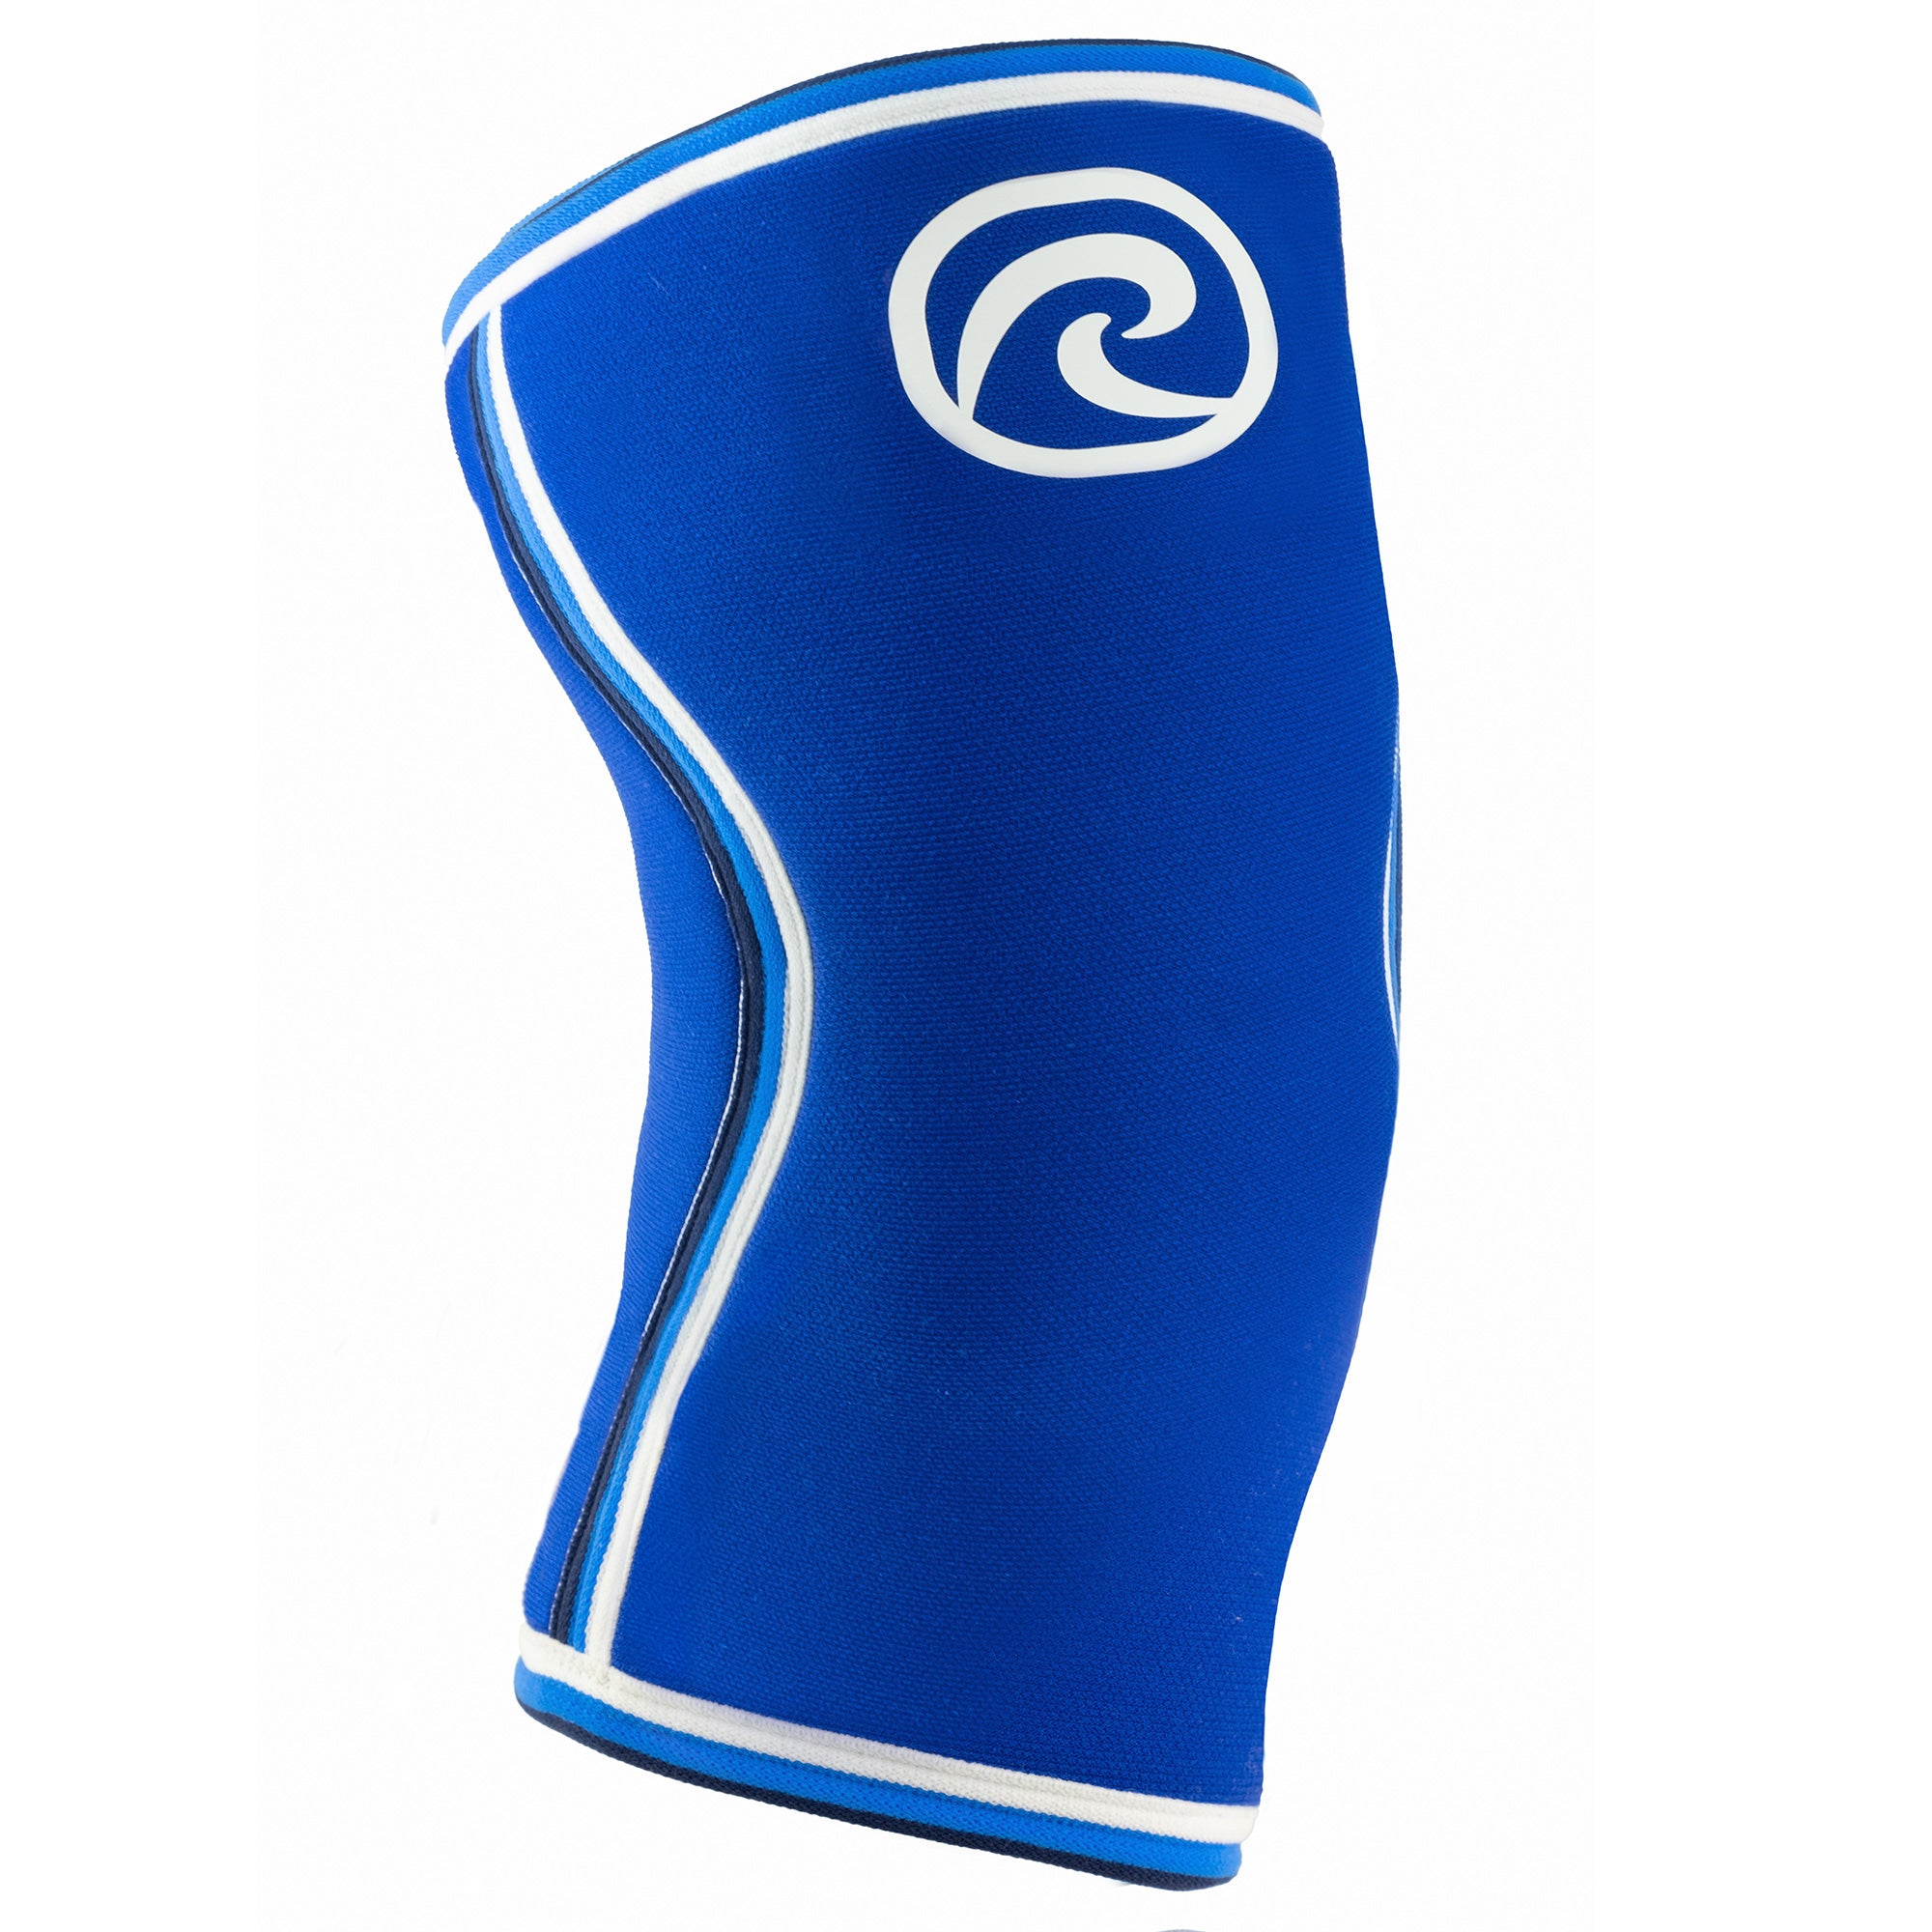 A blue/white knee sleeve with a white Rehband logo at the top